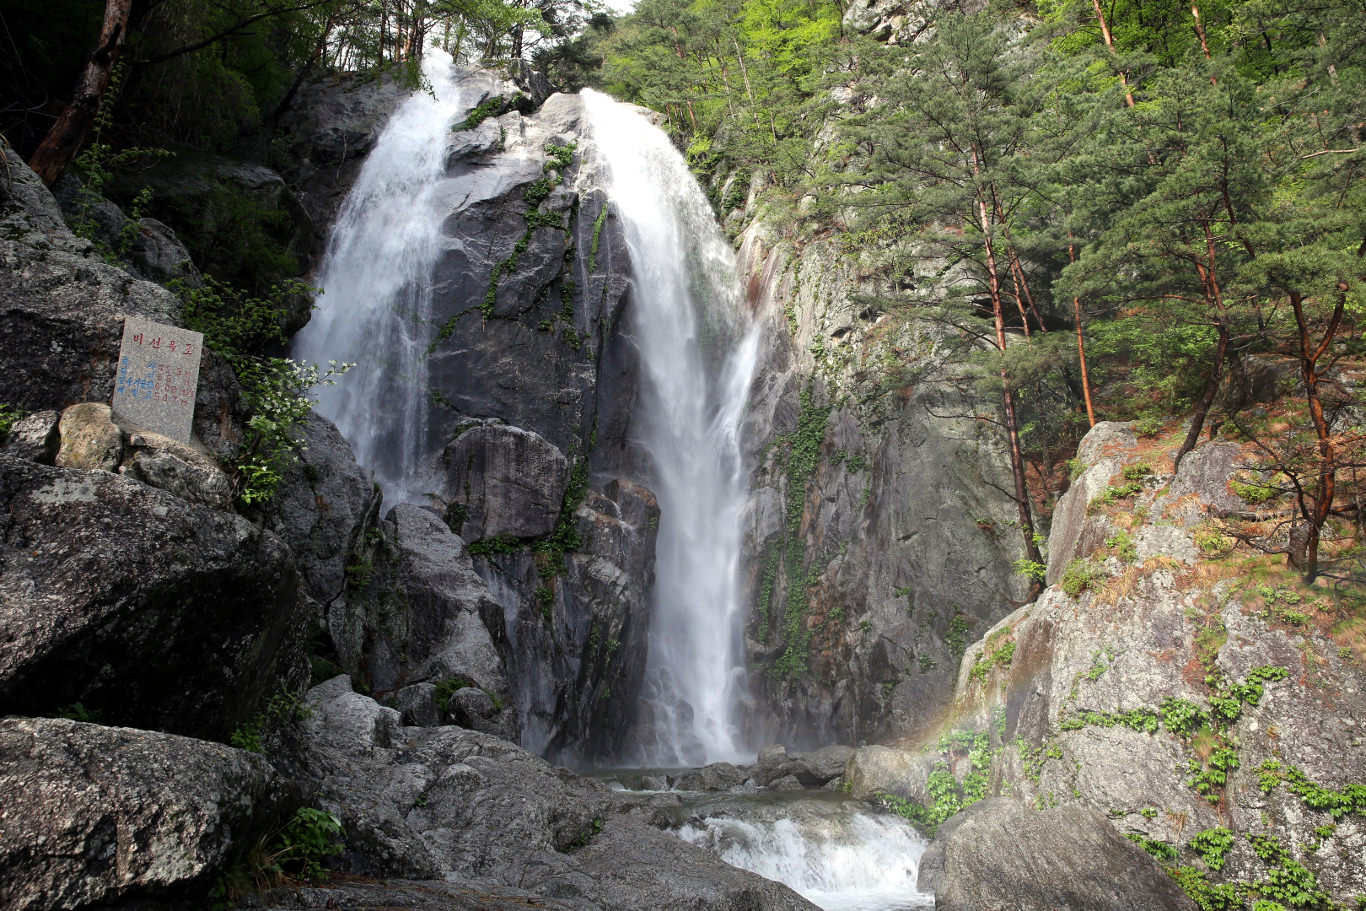 Waterfall in the Manpok Valley in North Pyongan province, North Korea (DPRK) with KTG Tours